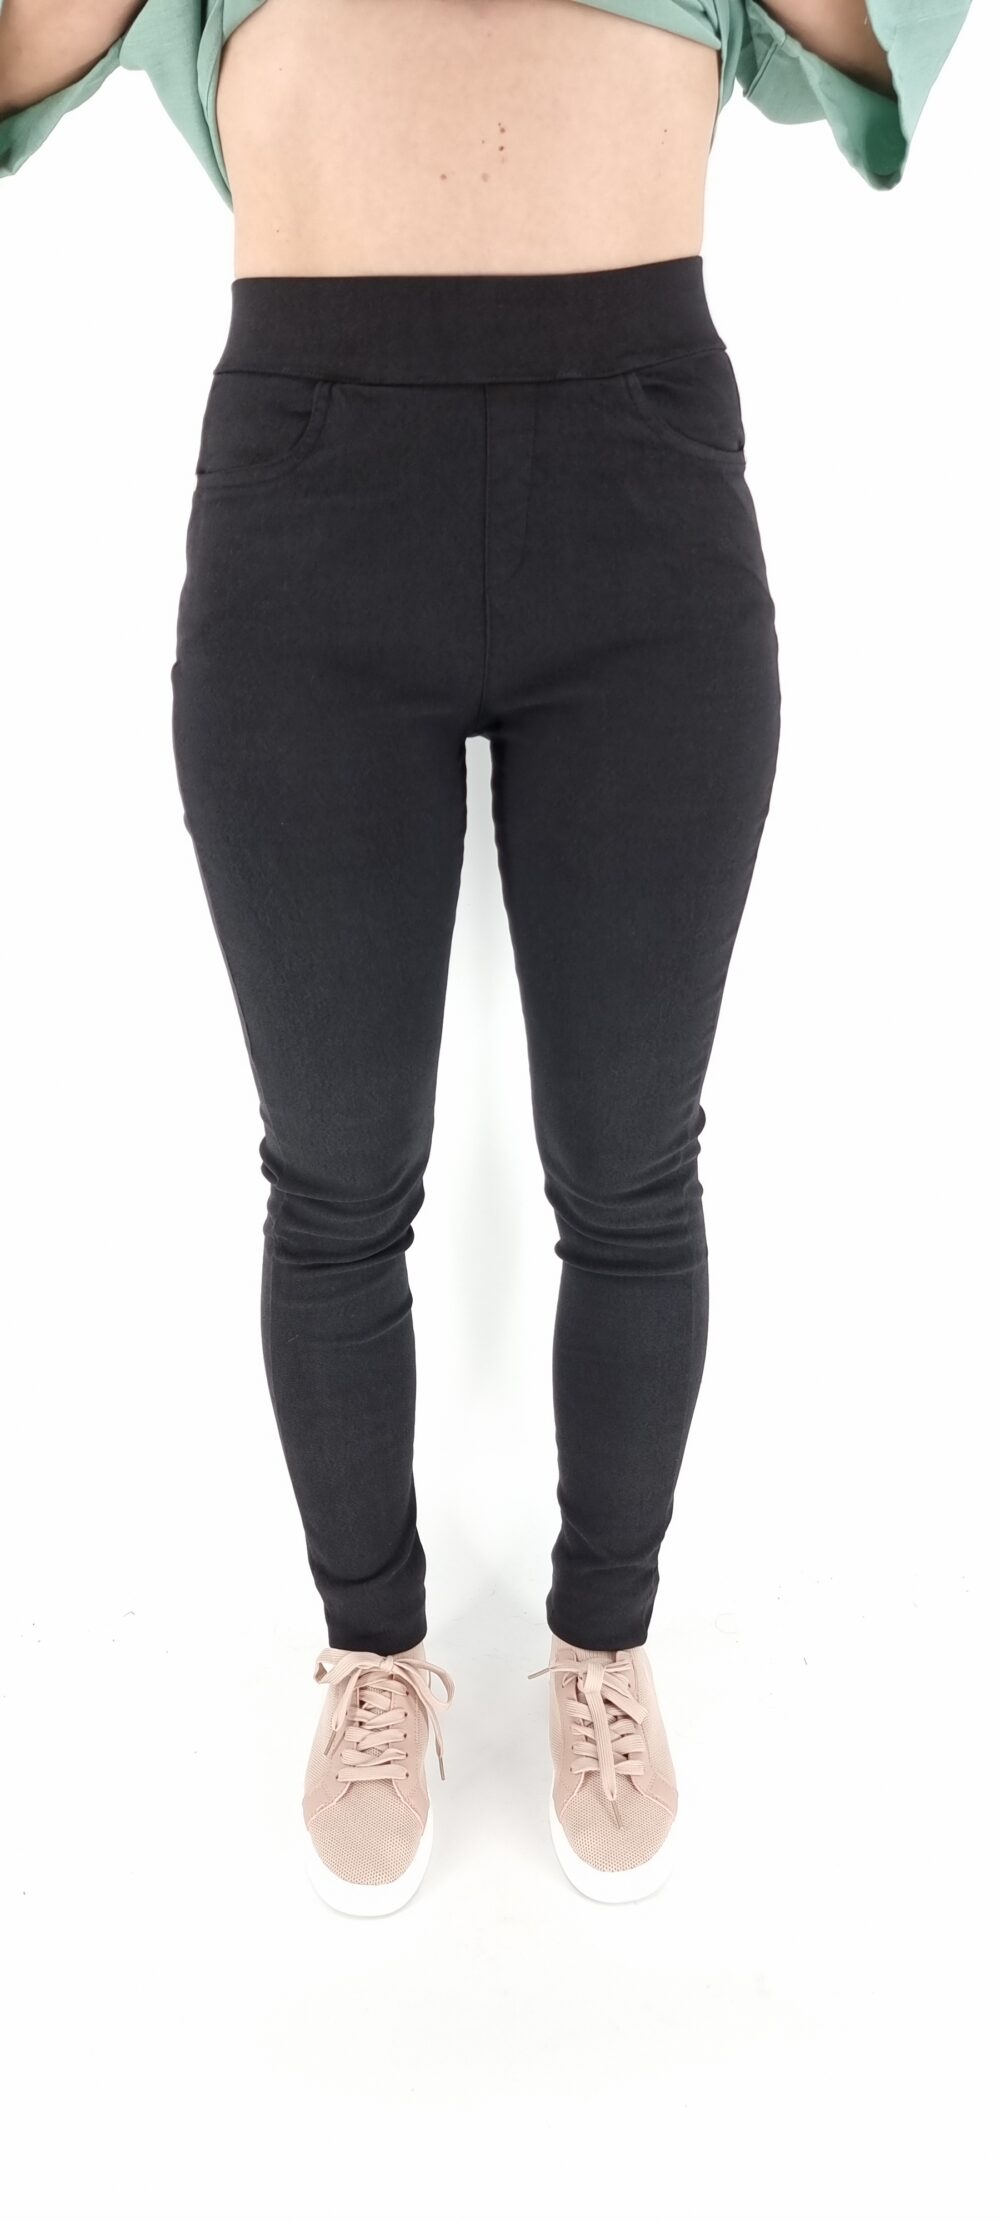 Leggings with elastic waist and pockets black